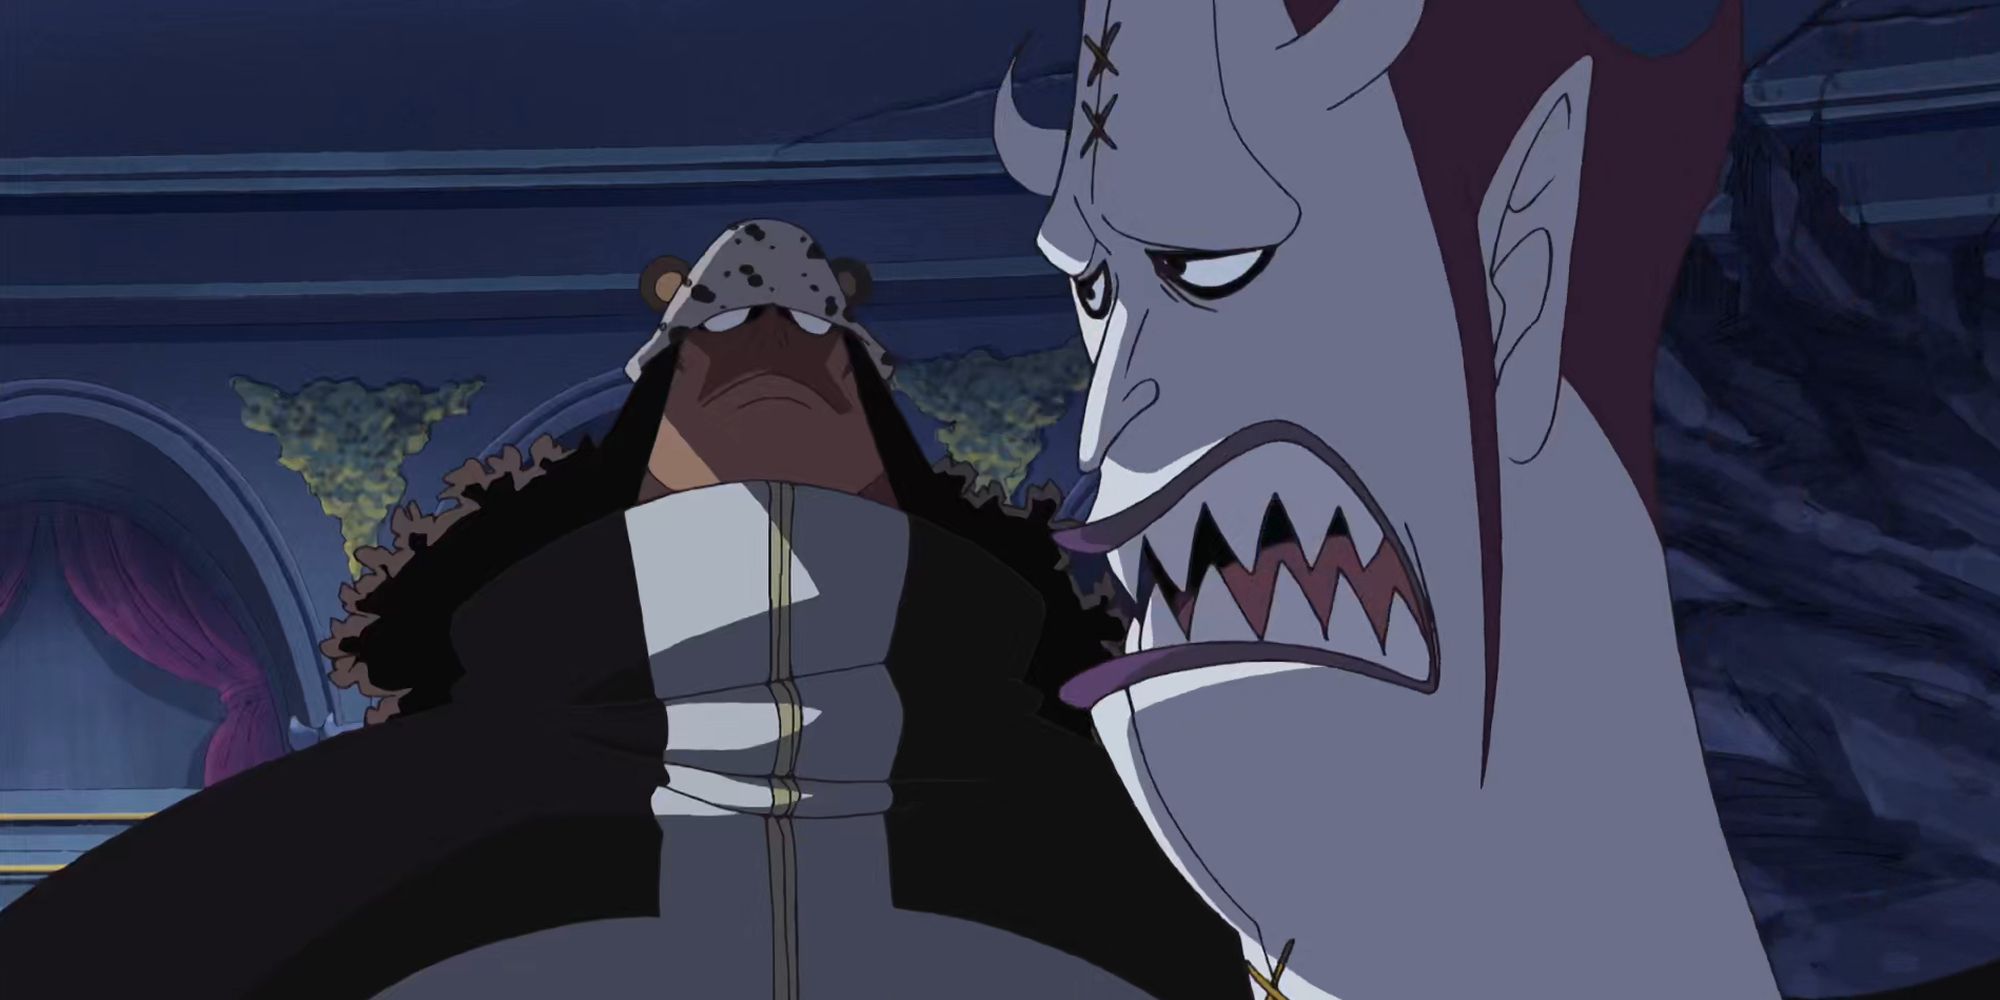 Kuma talks with Gecko Moria about the World Government's concerns in One PieceKuma talks with Gecko Moria about the World Government's concerns in One Piece